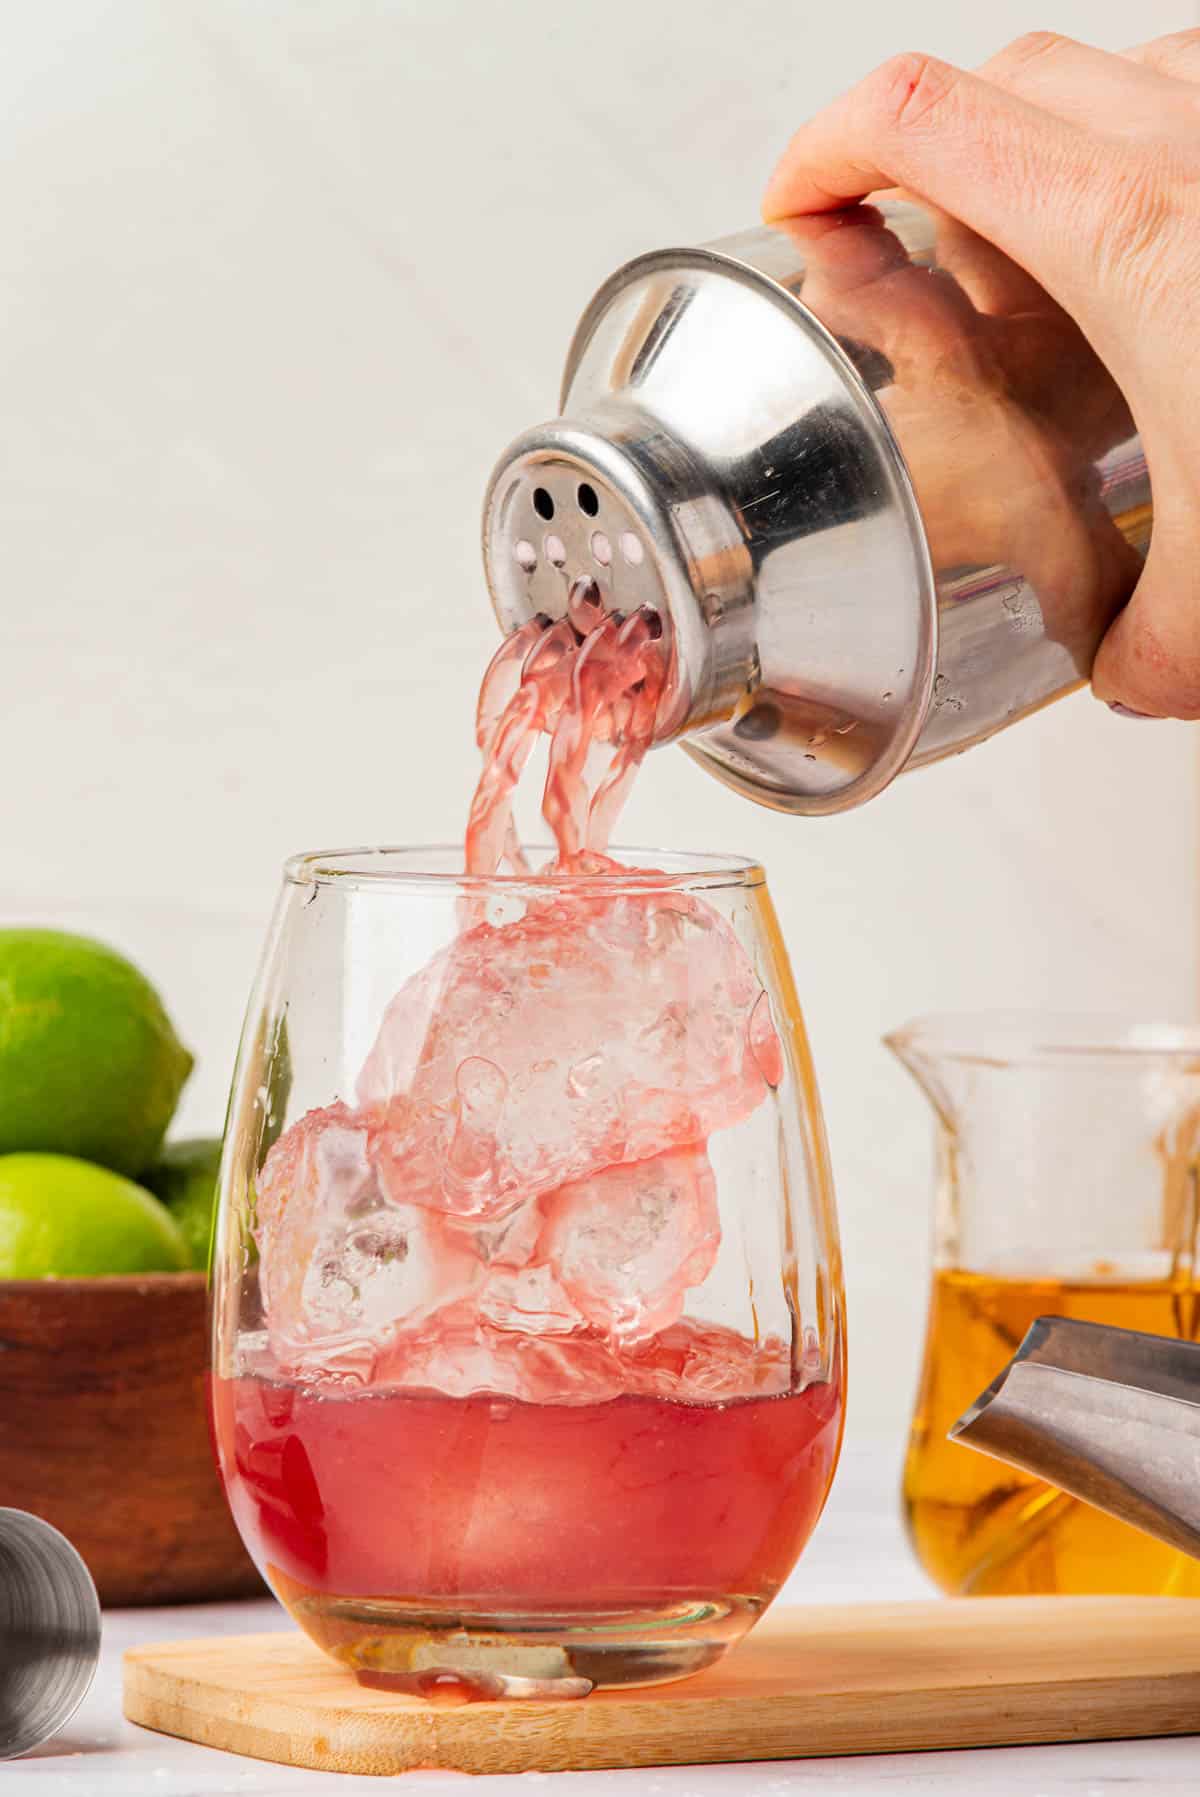 Pouring red drink into glass of ice.